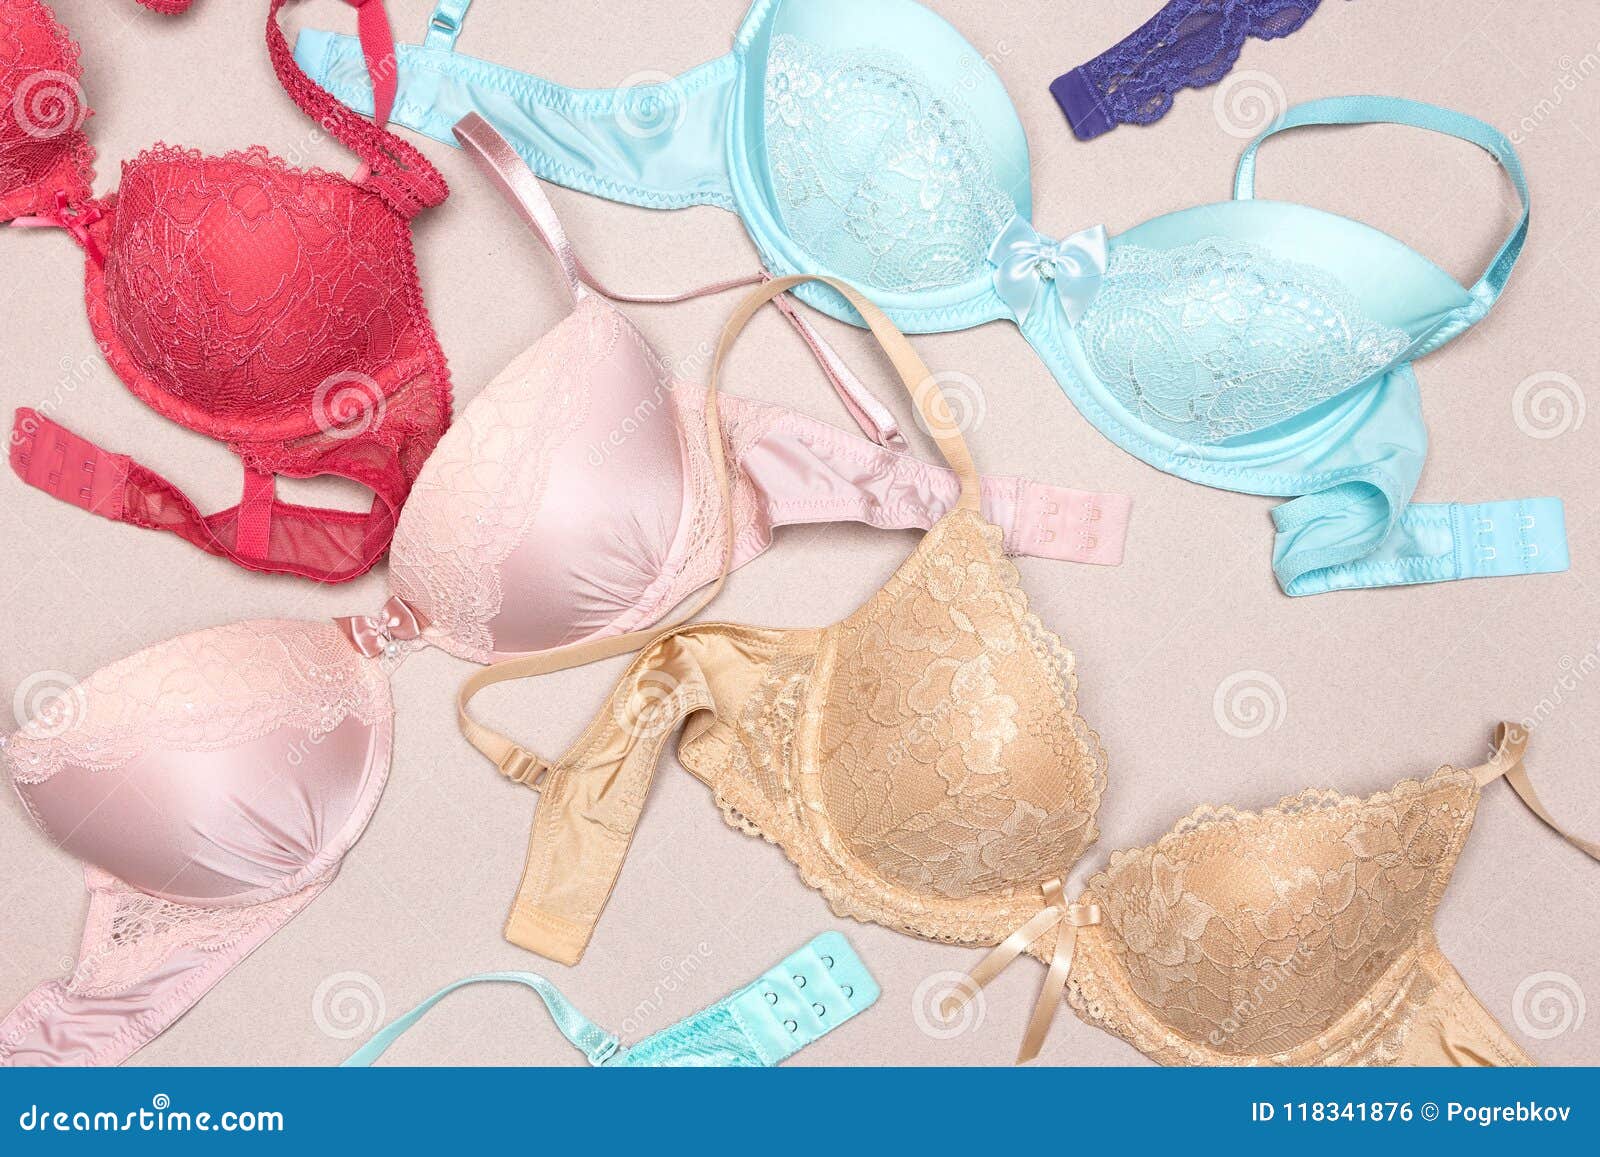 Lace Lingerie Sets of Colored Bras and Panties with Free Space F Stock  Photo - Image of bikini, copy: 118341906